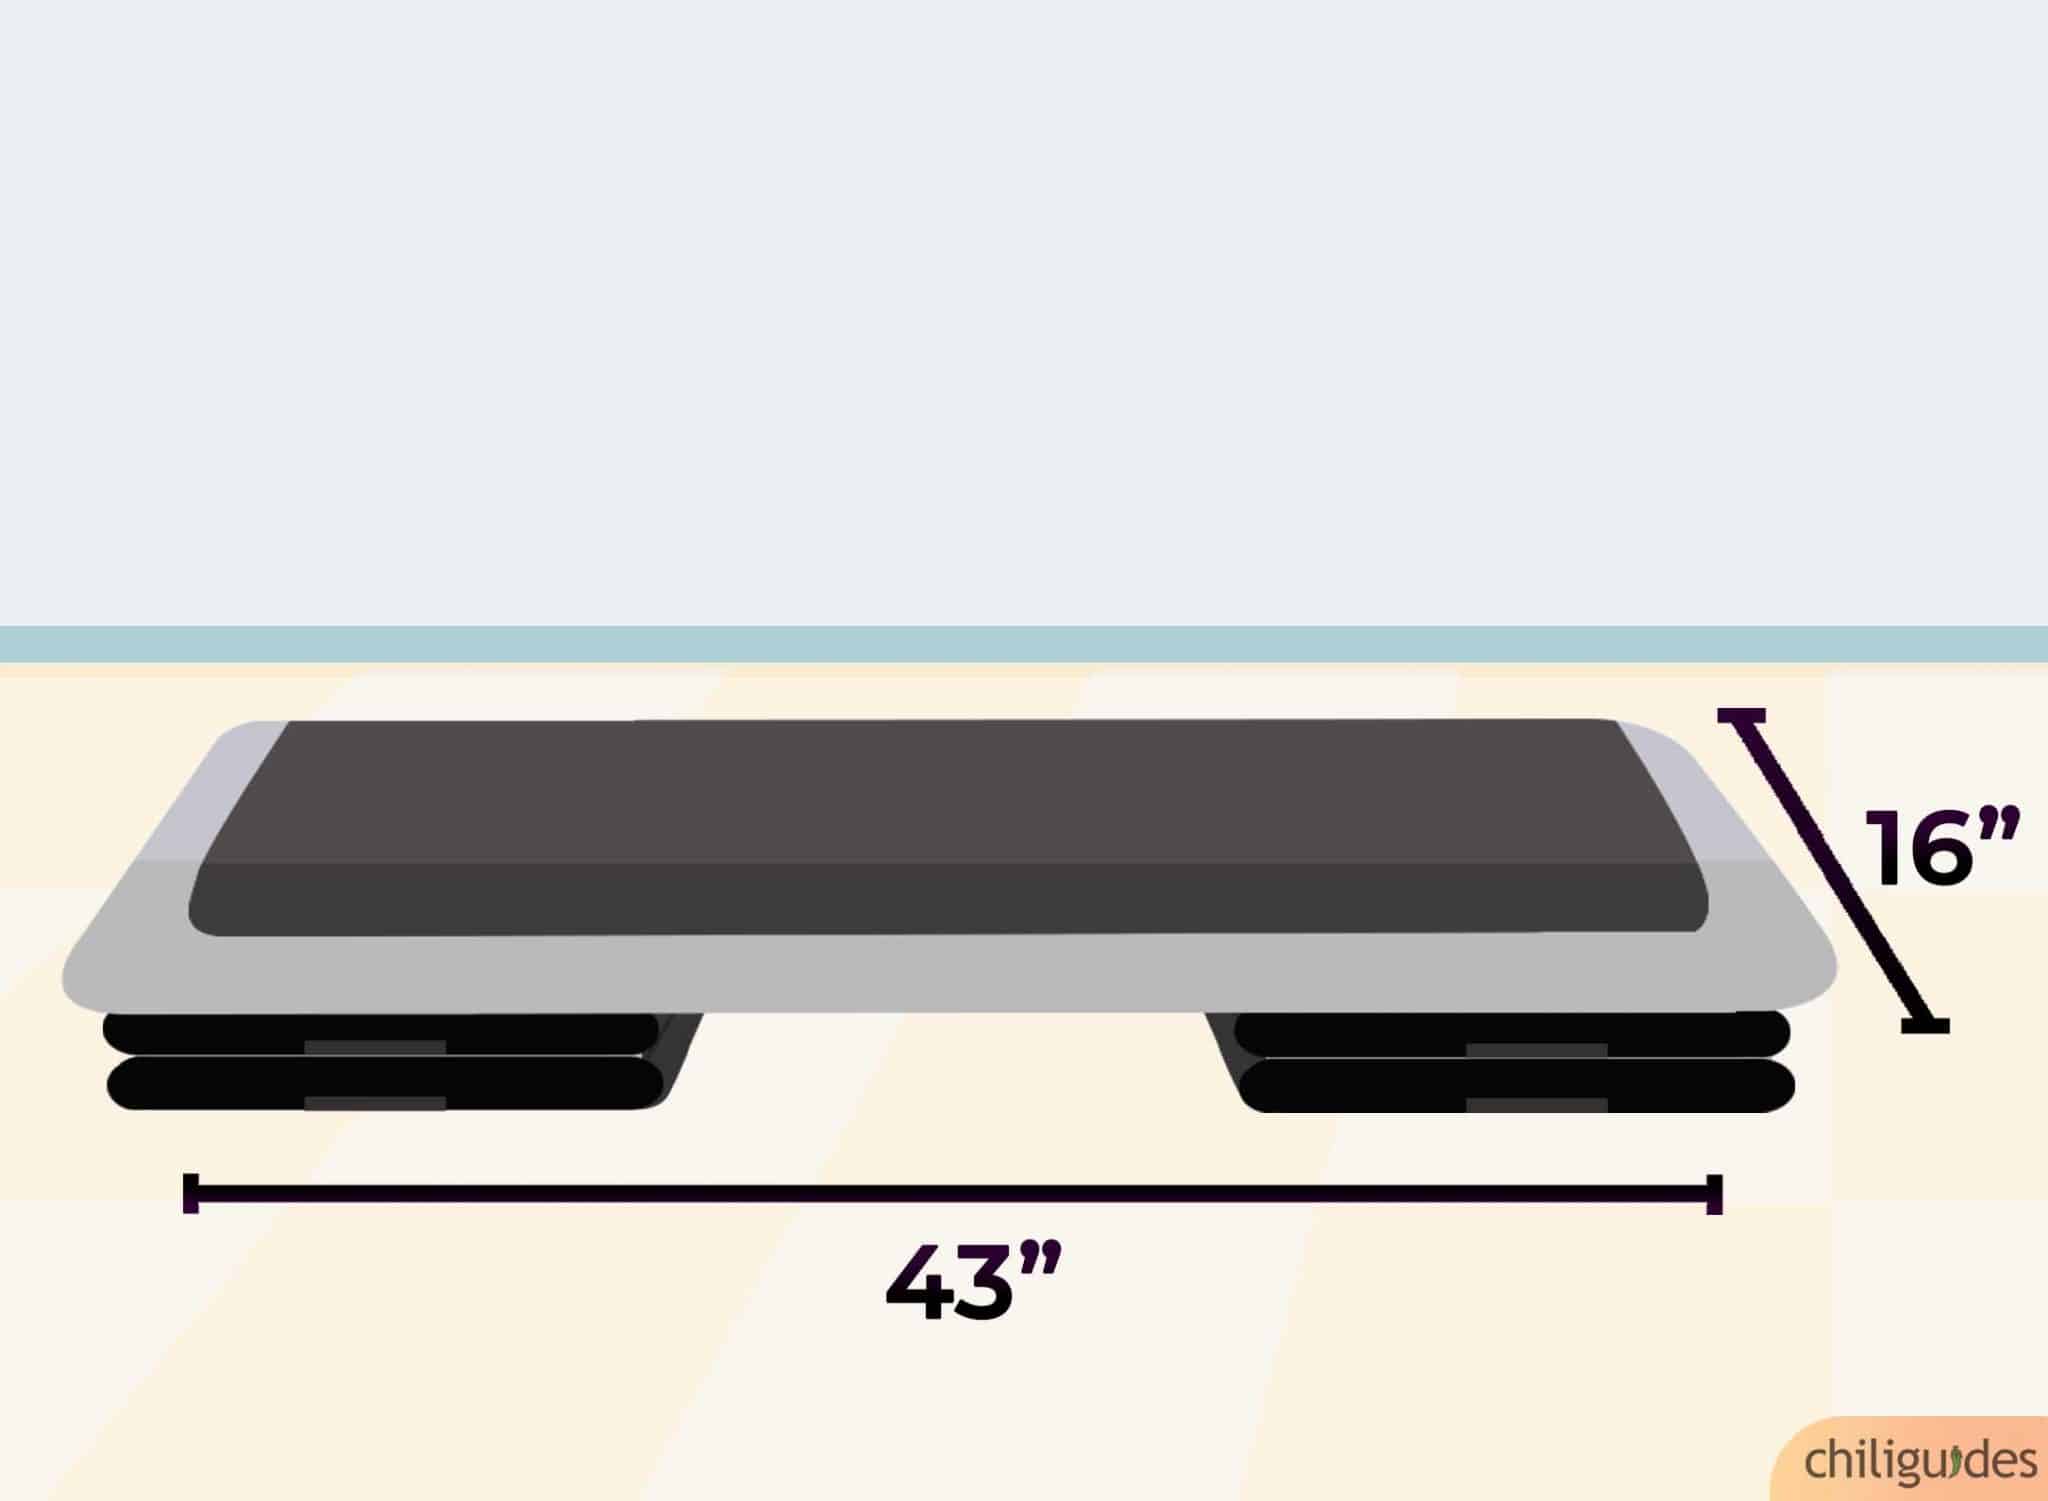 Get a stepper with adequate surface area on the platform.